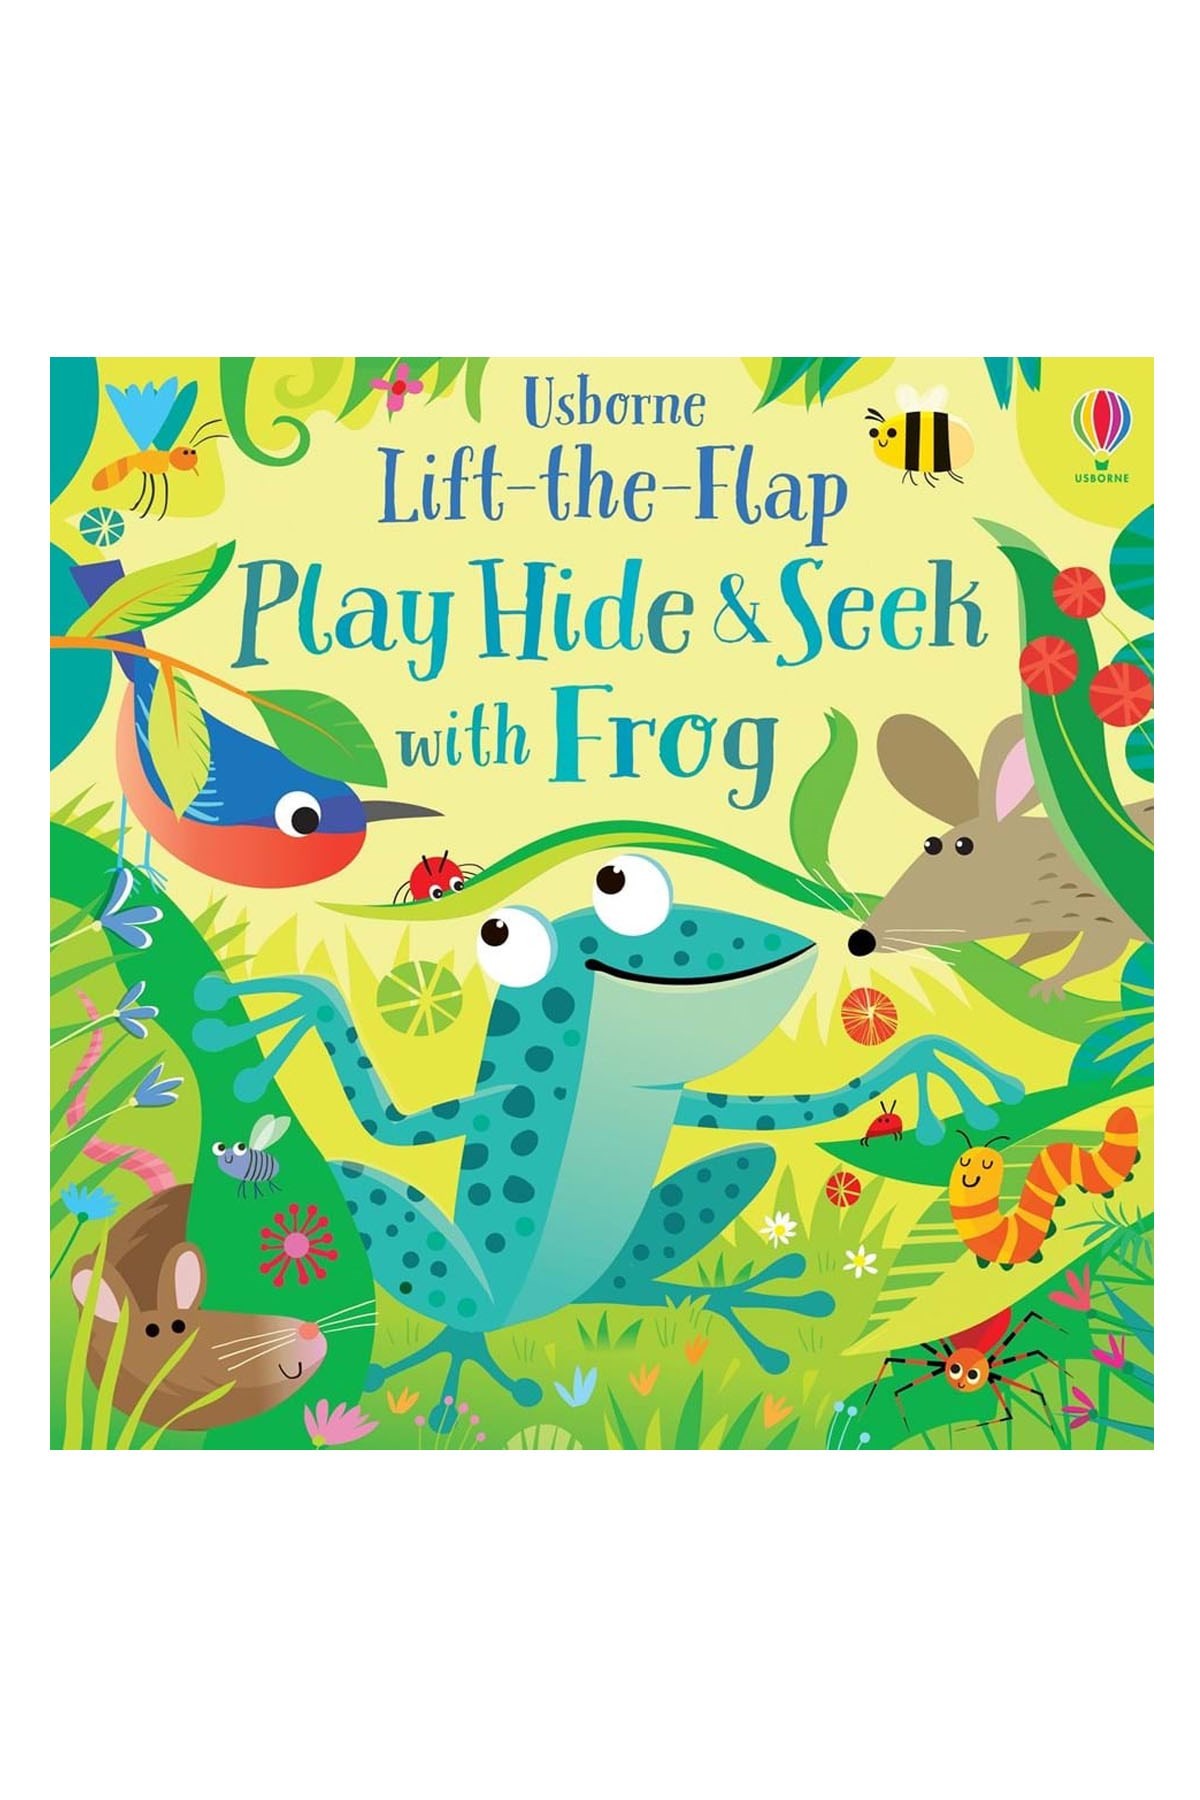 The Usborne Play Hide and Seek With Frog